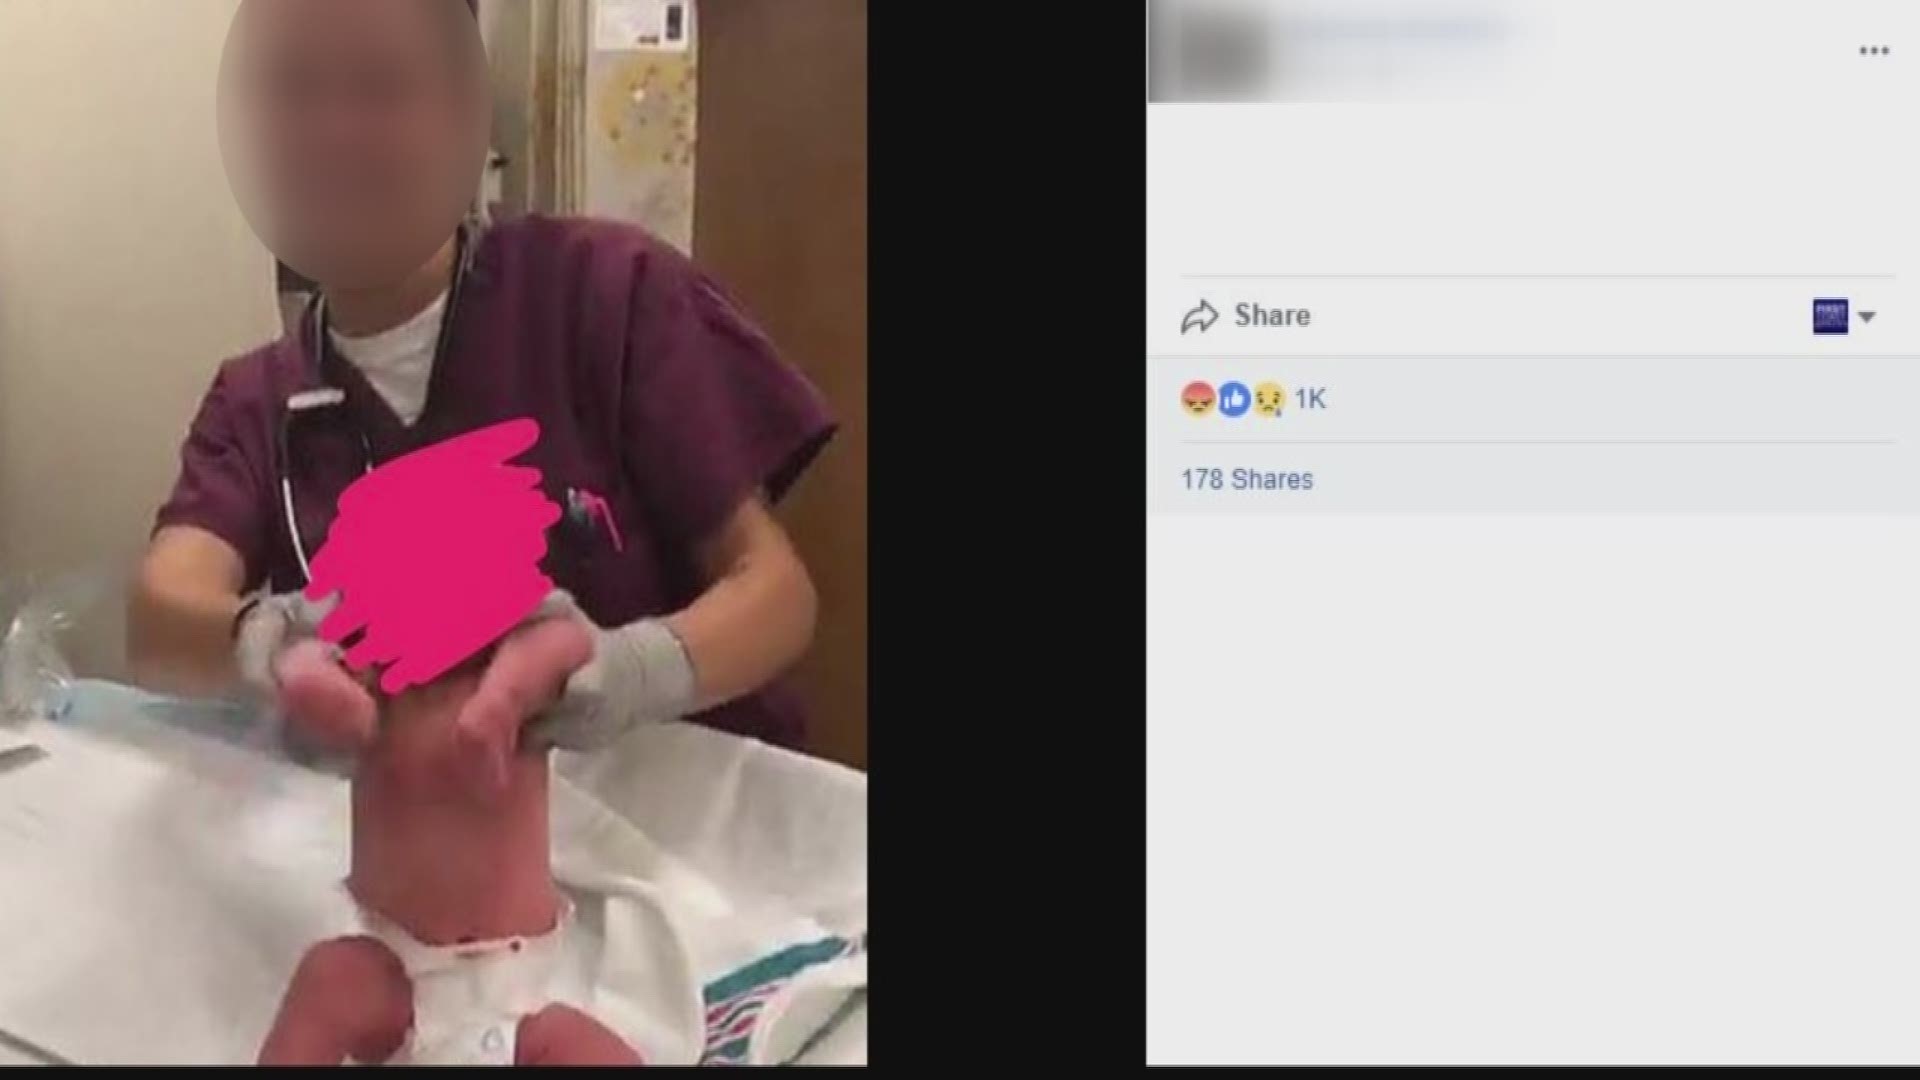 Brittany Dionne reports how one photo shows an employee giving a newborn the middle finger with the caption: "How I currently feel about these mini Satans."